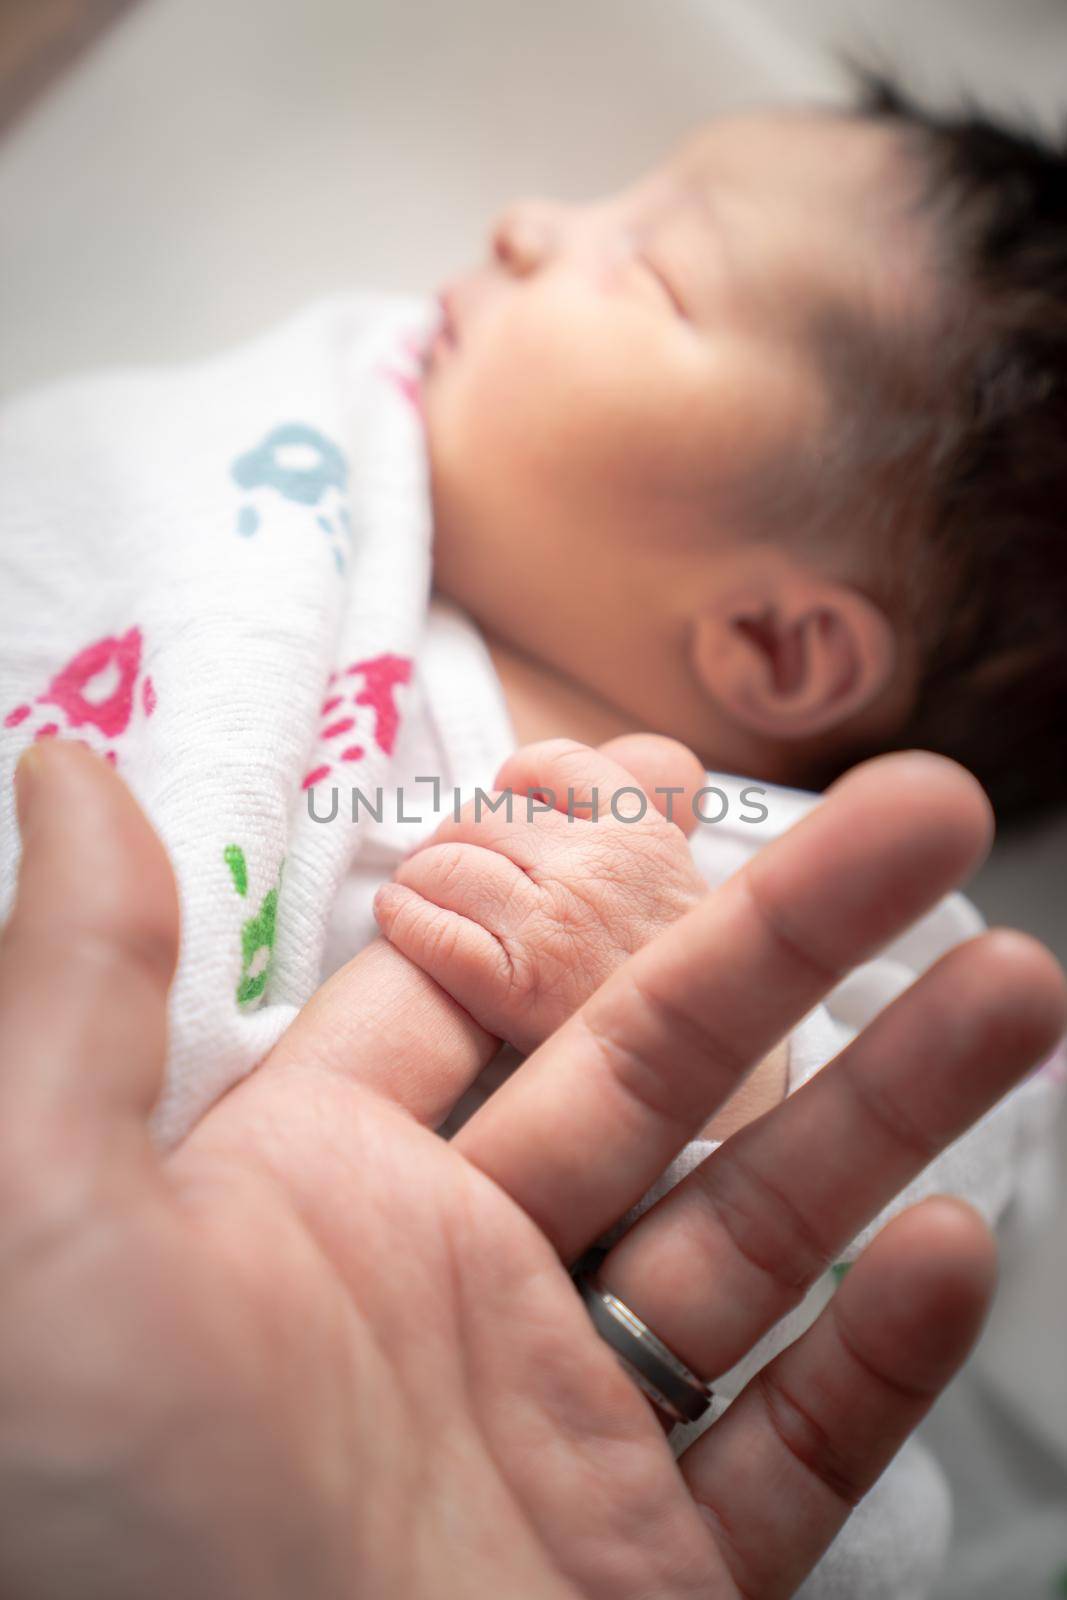 A newborn infant baby girl in a blanket swaddle wraps her tiny hand and fingers around her father's finger as she sleeps peacefully.